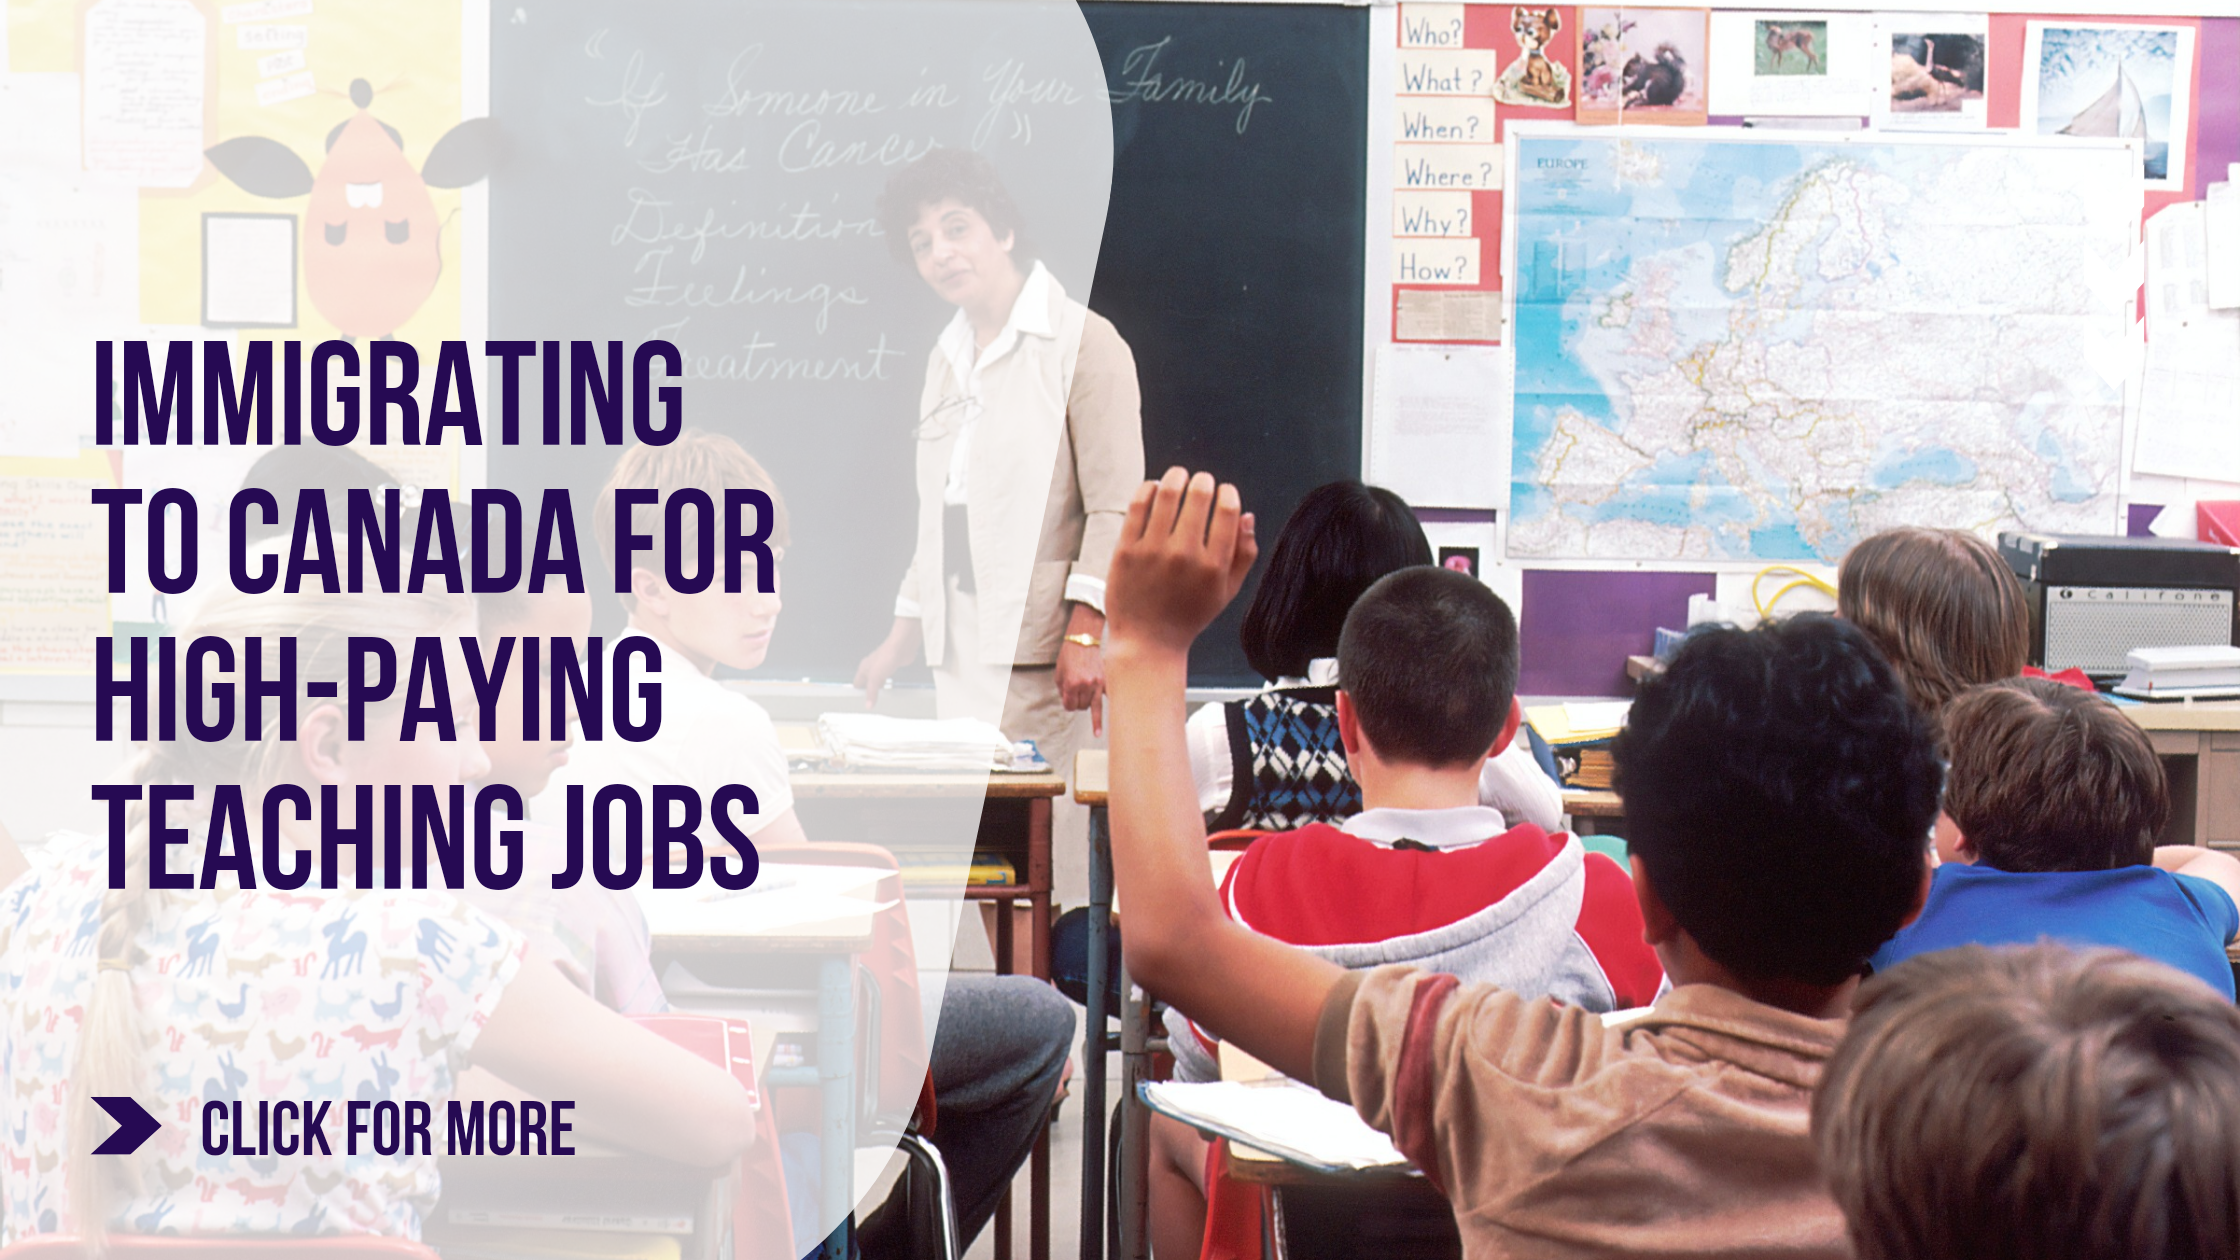 The Canadian Education System: Immigrating to Canada for High-Paying Teaching Jobs